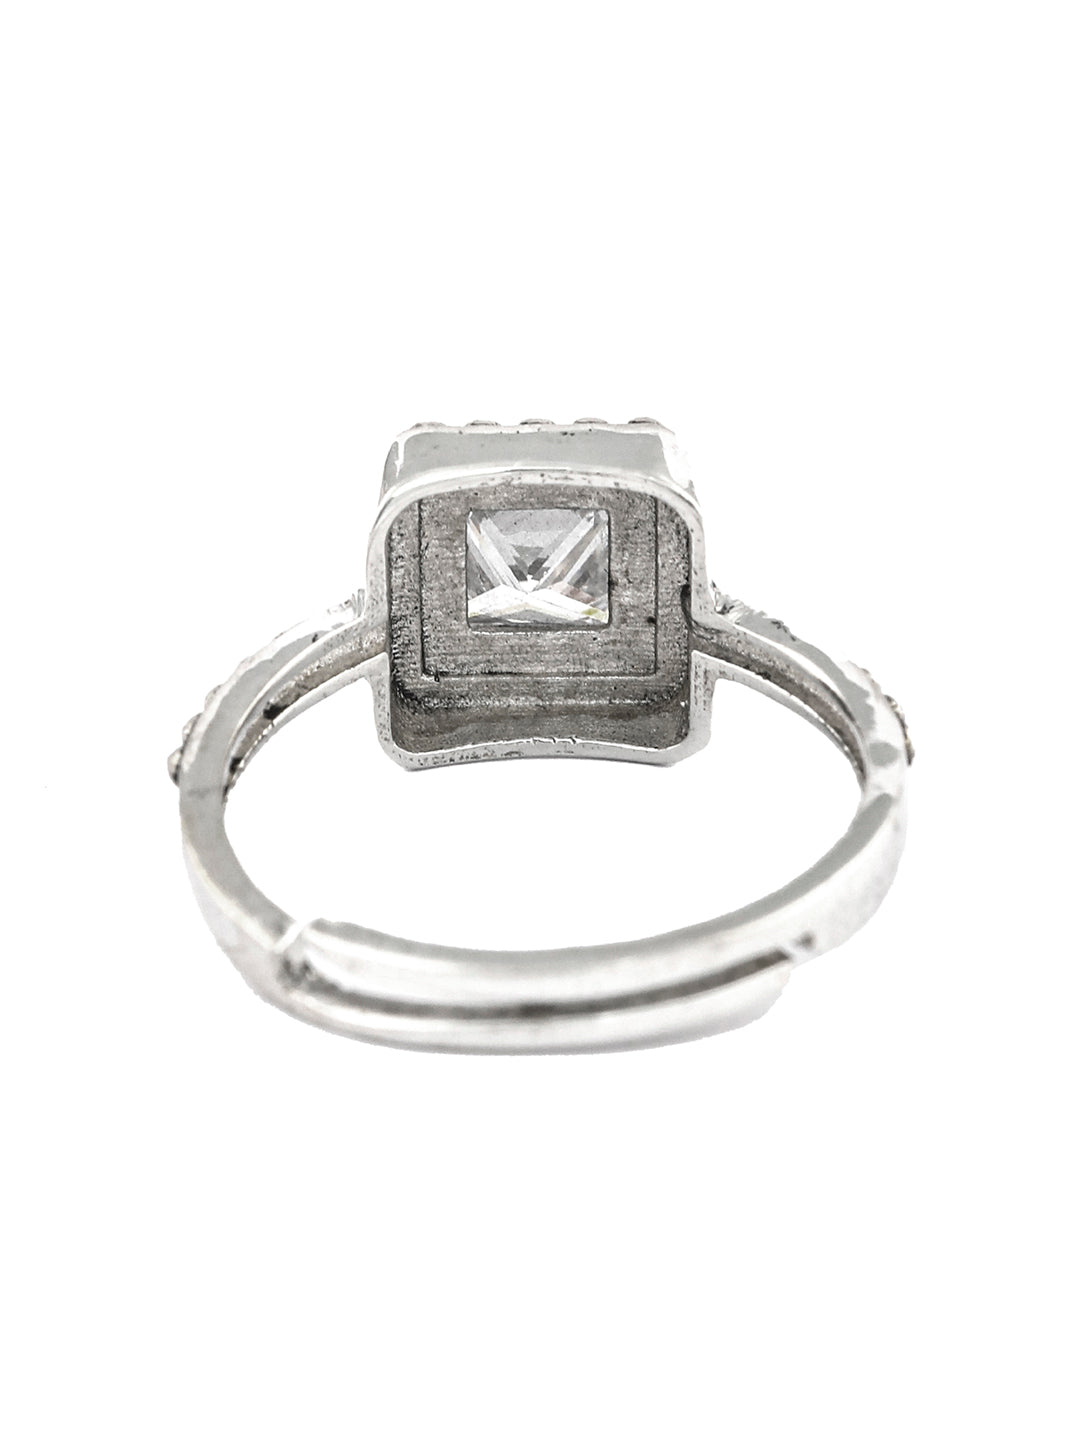 Oxidised Silver Solitaire Ring